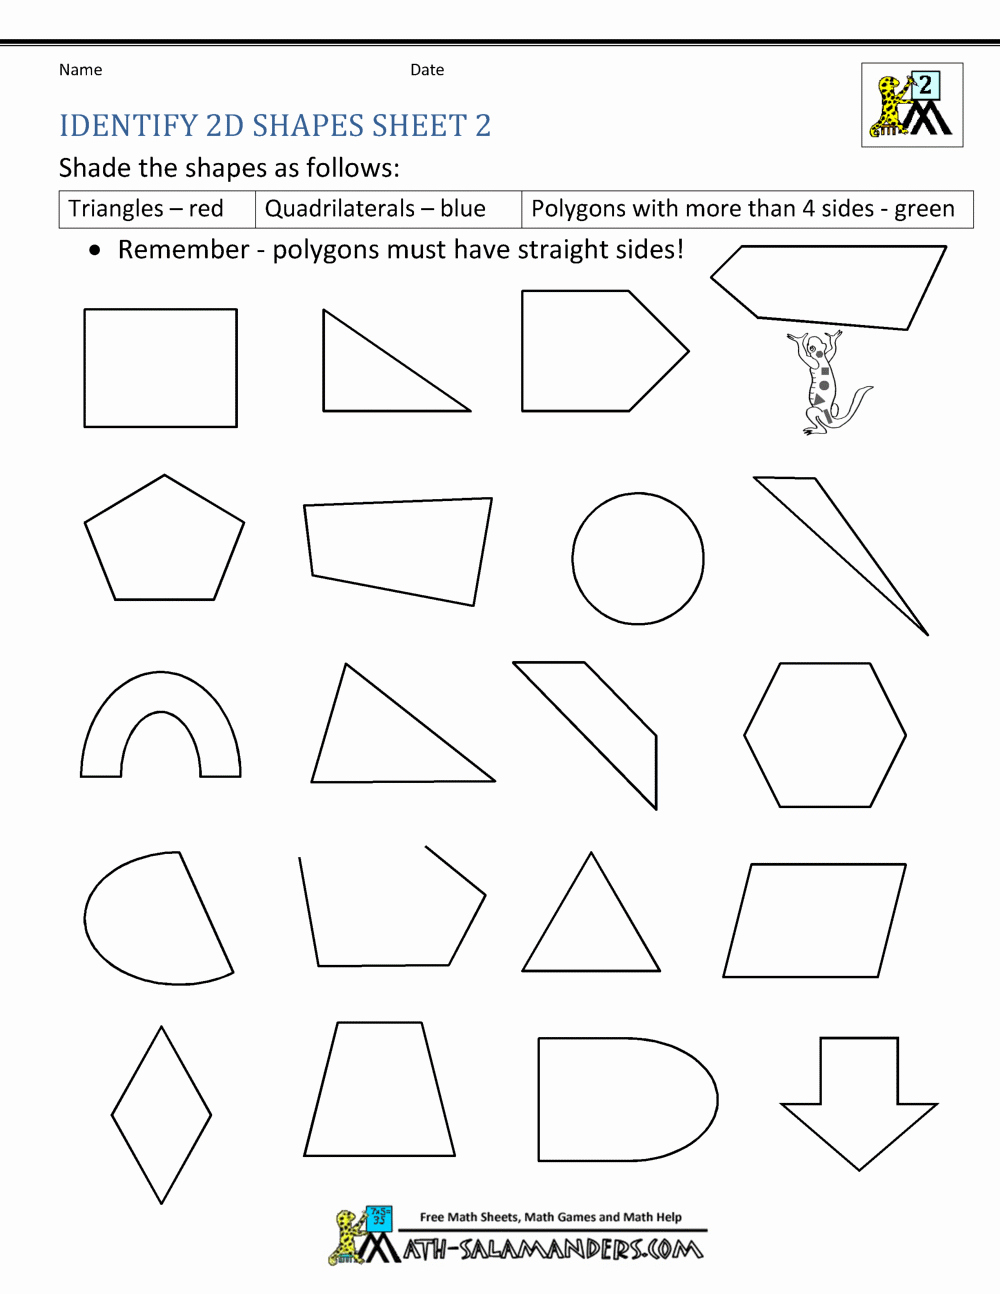 Shapes Worksheets 2nd Grade Awesome 30 Geometry Worksheet for 2nd Grade Worksheet Project List